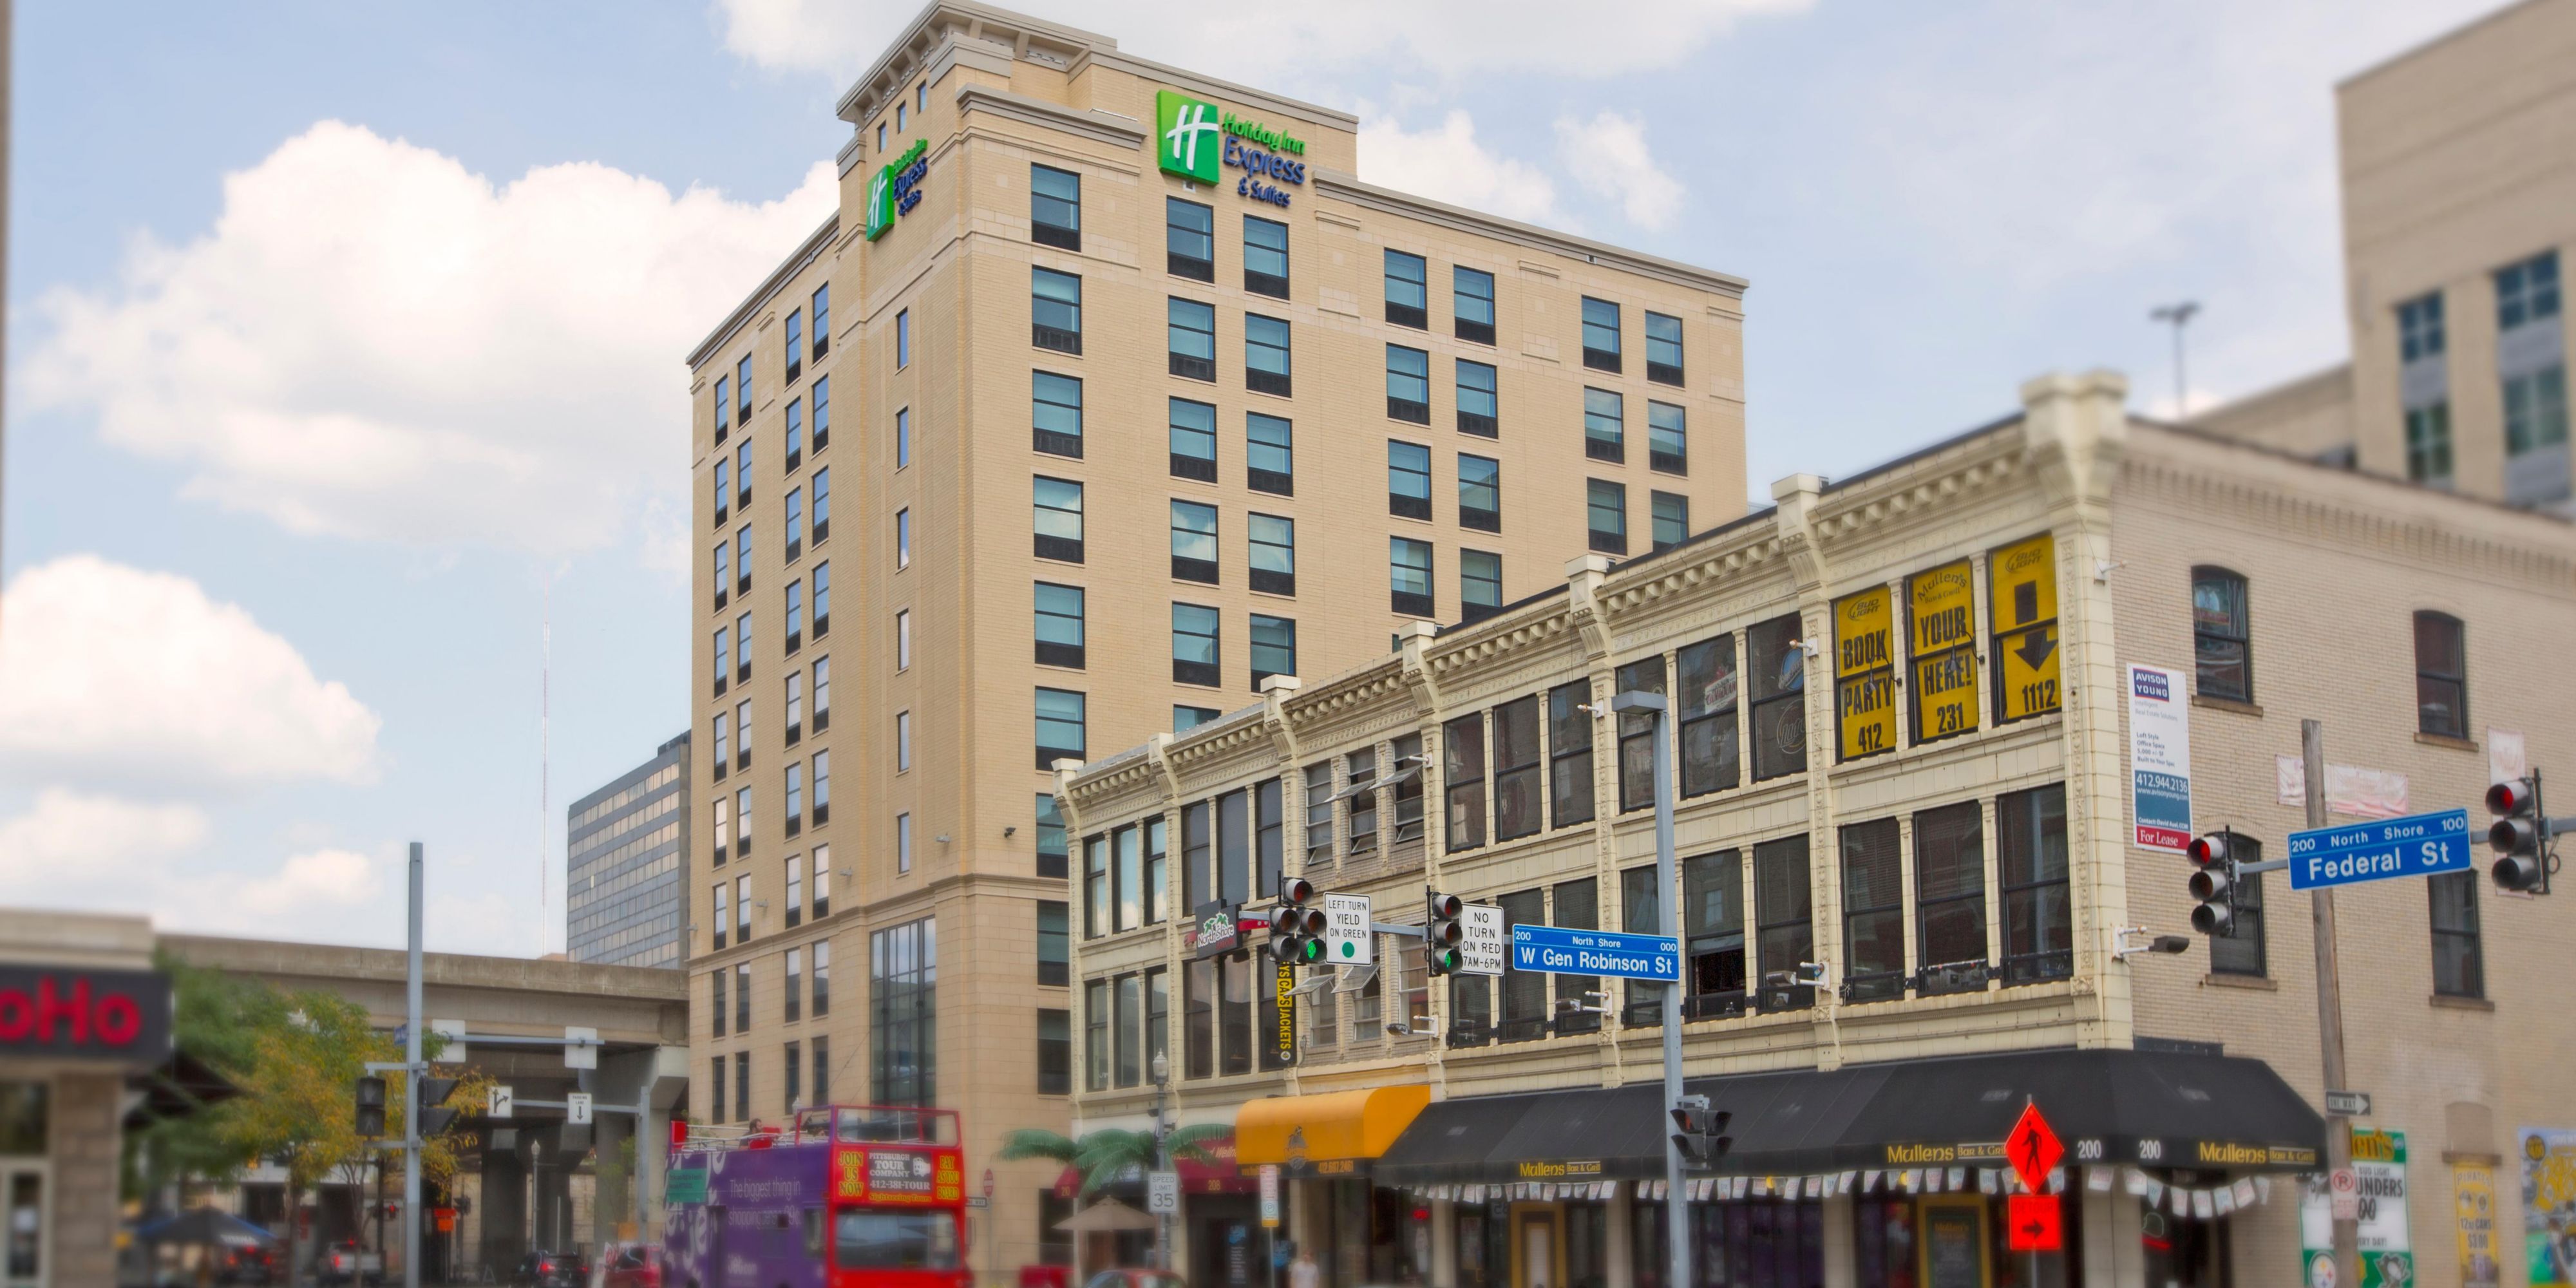 All guests staying at the Holiday Inn Express & Suites Pittsburgh-North Shore have easy access access to live music and event venue, Stage AE, only half a mile from our hotel.